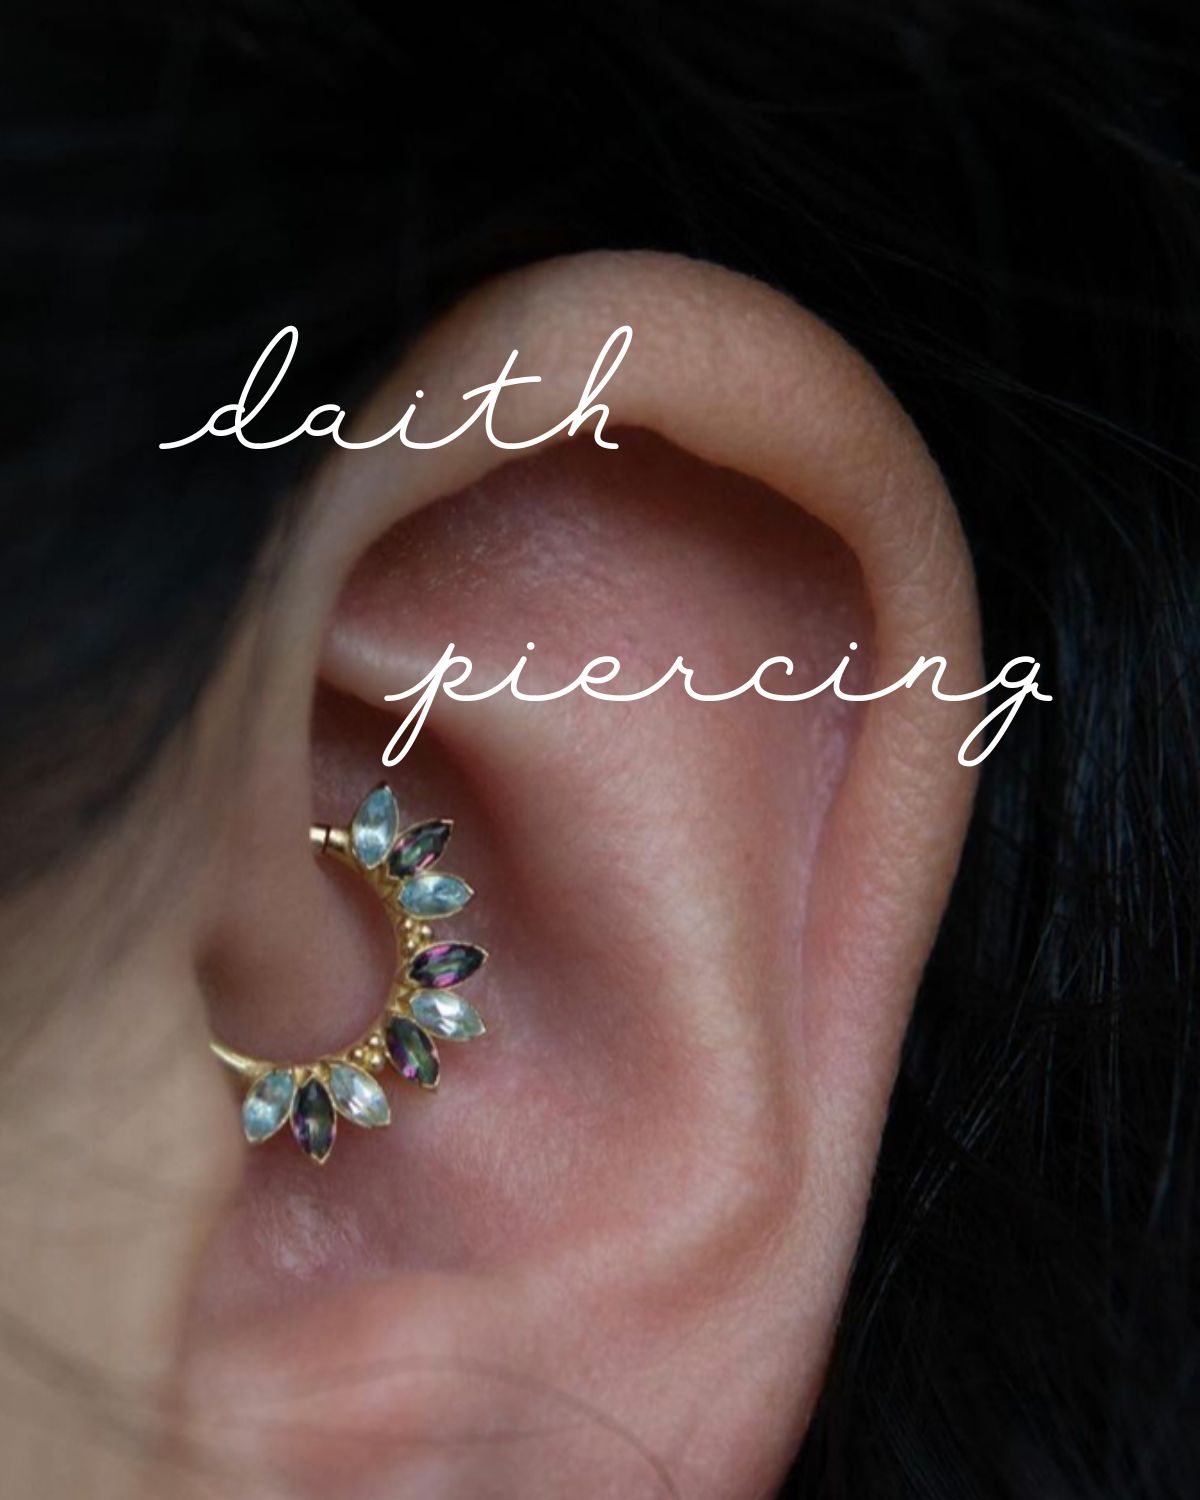 A daith piercing with many stones on a hoop